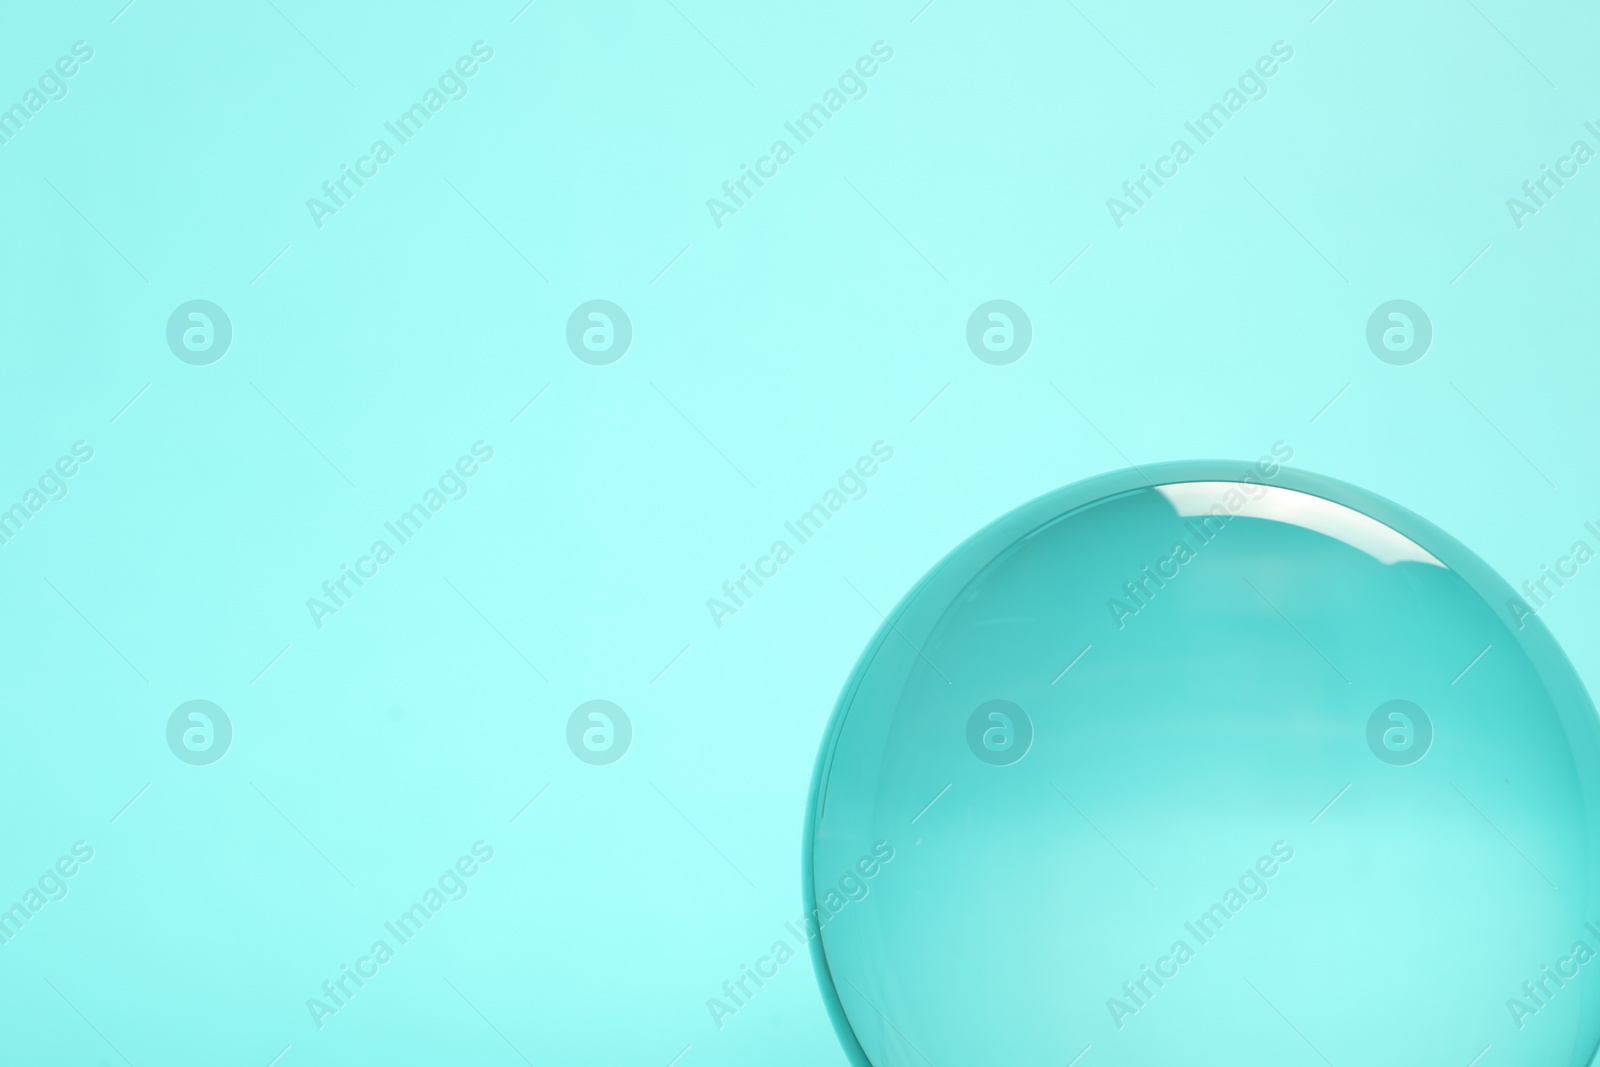 Photo of Transparent glass ball on turquoise background. Space for text